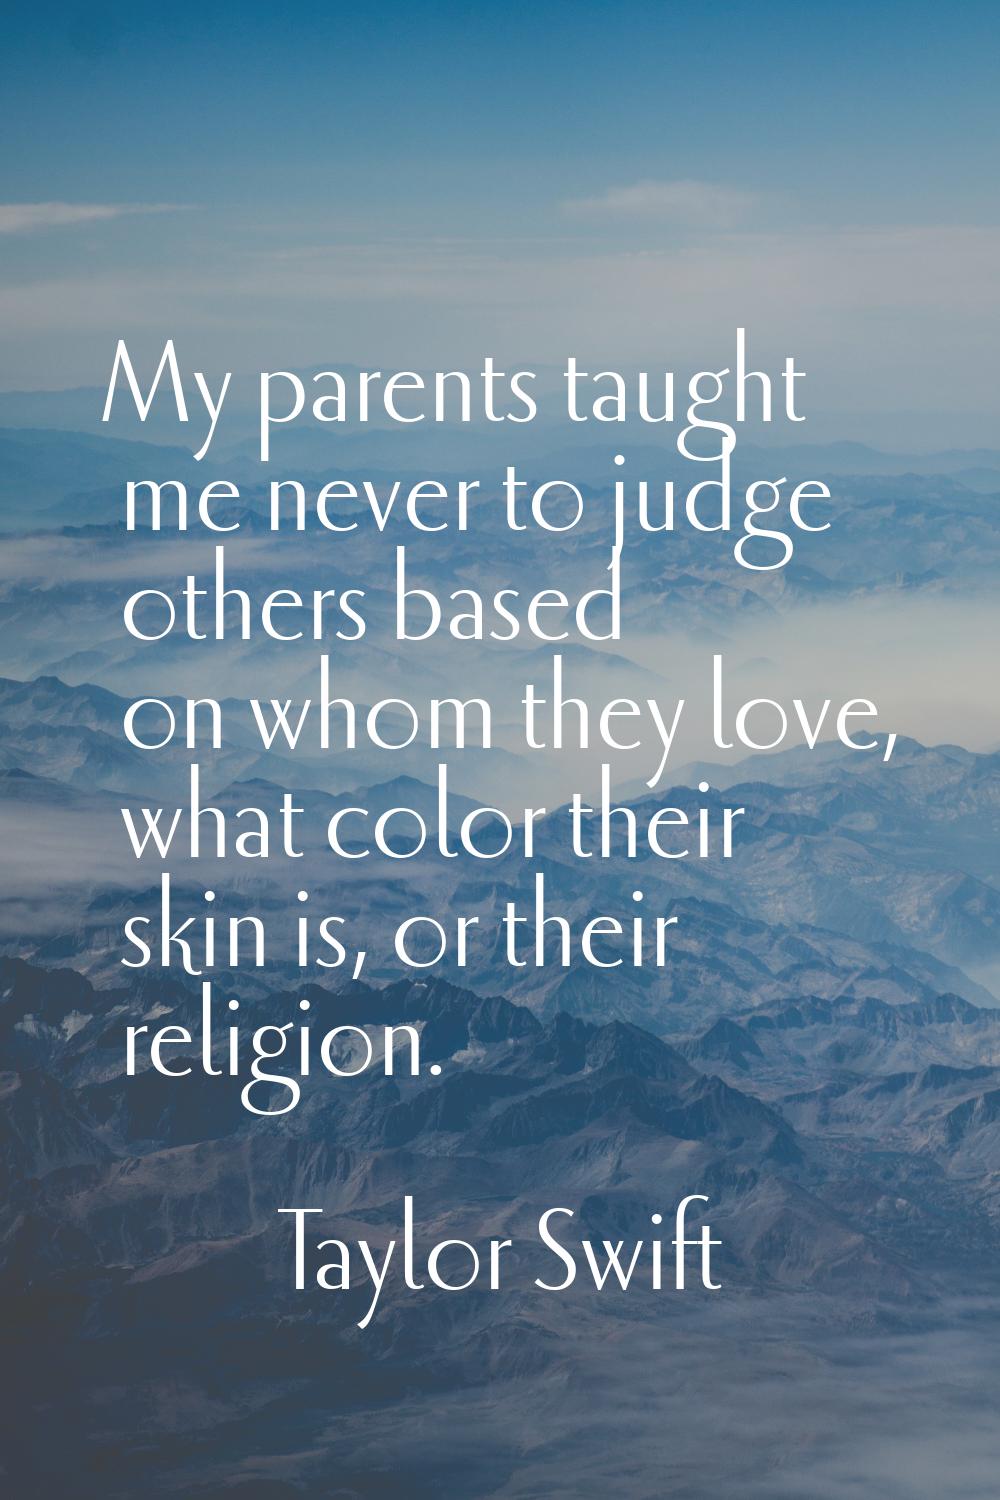 My parents taught me never to judge others based on whom they love, what color their skin is, or th